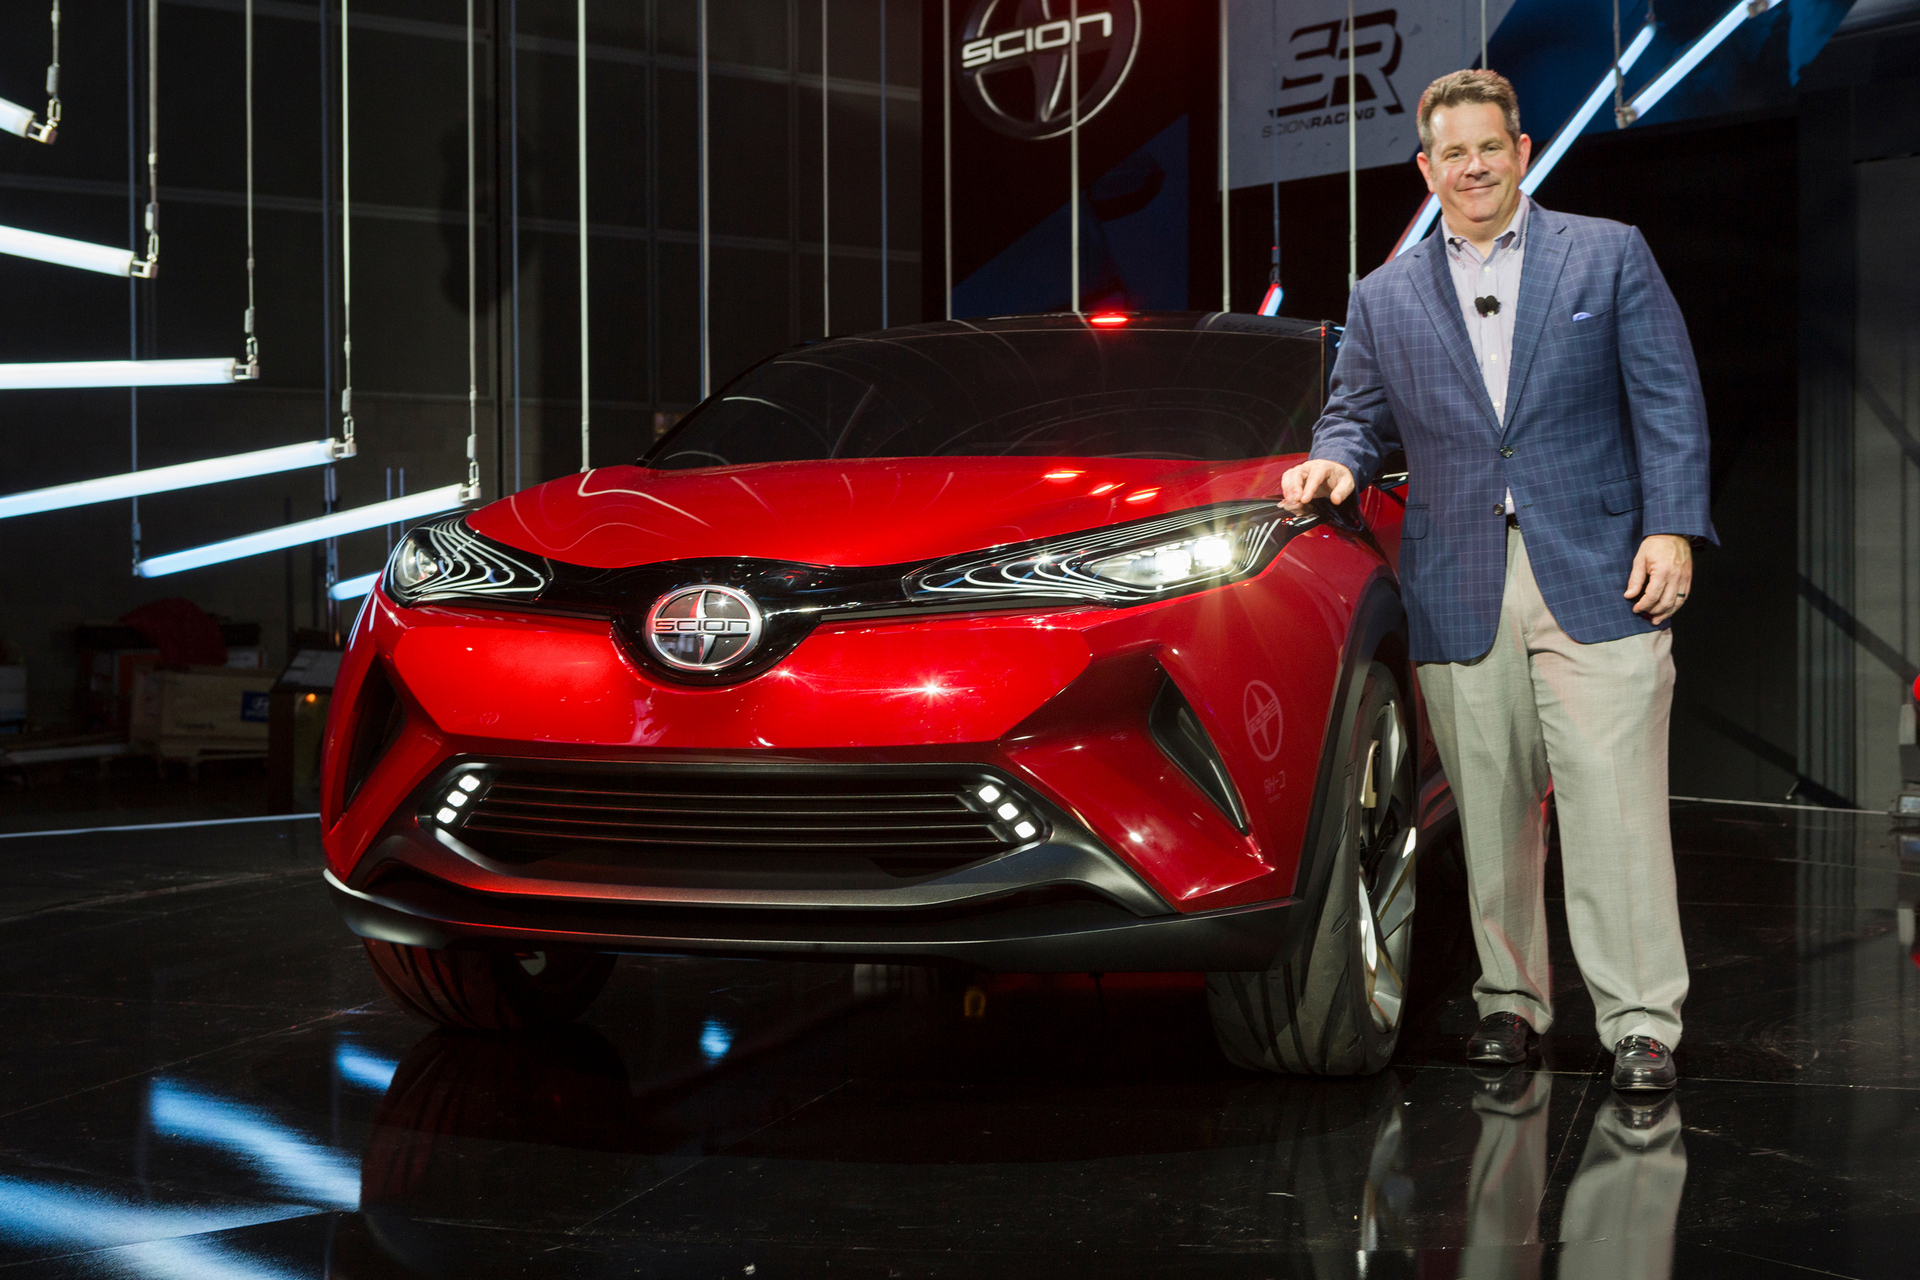 Scion Vice President Andrew Gilleland reveals the Scion C-HR Concept vehicle during the Los Angeles Auto Show © Toyota Motor Corporation